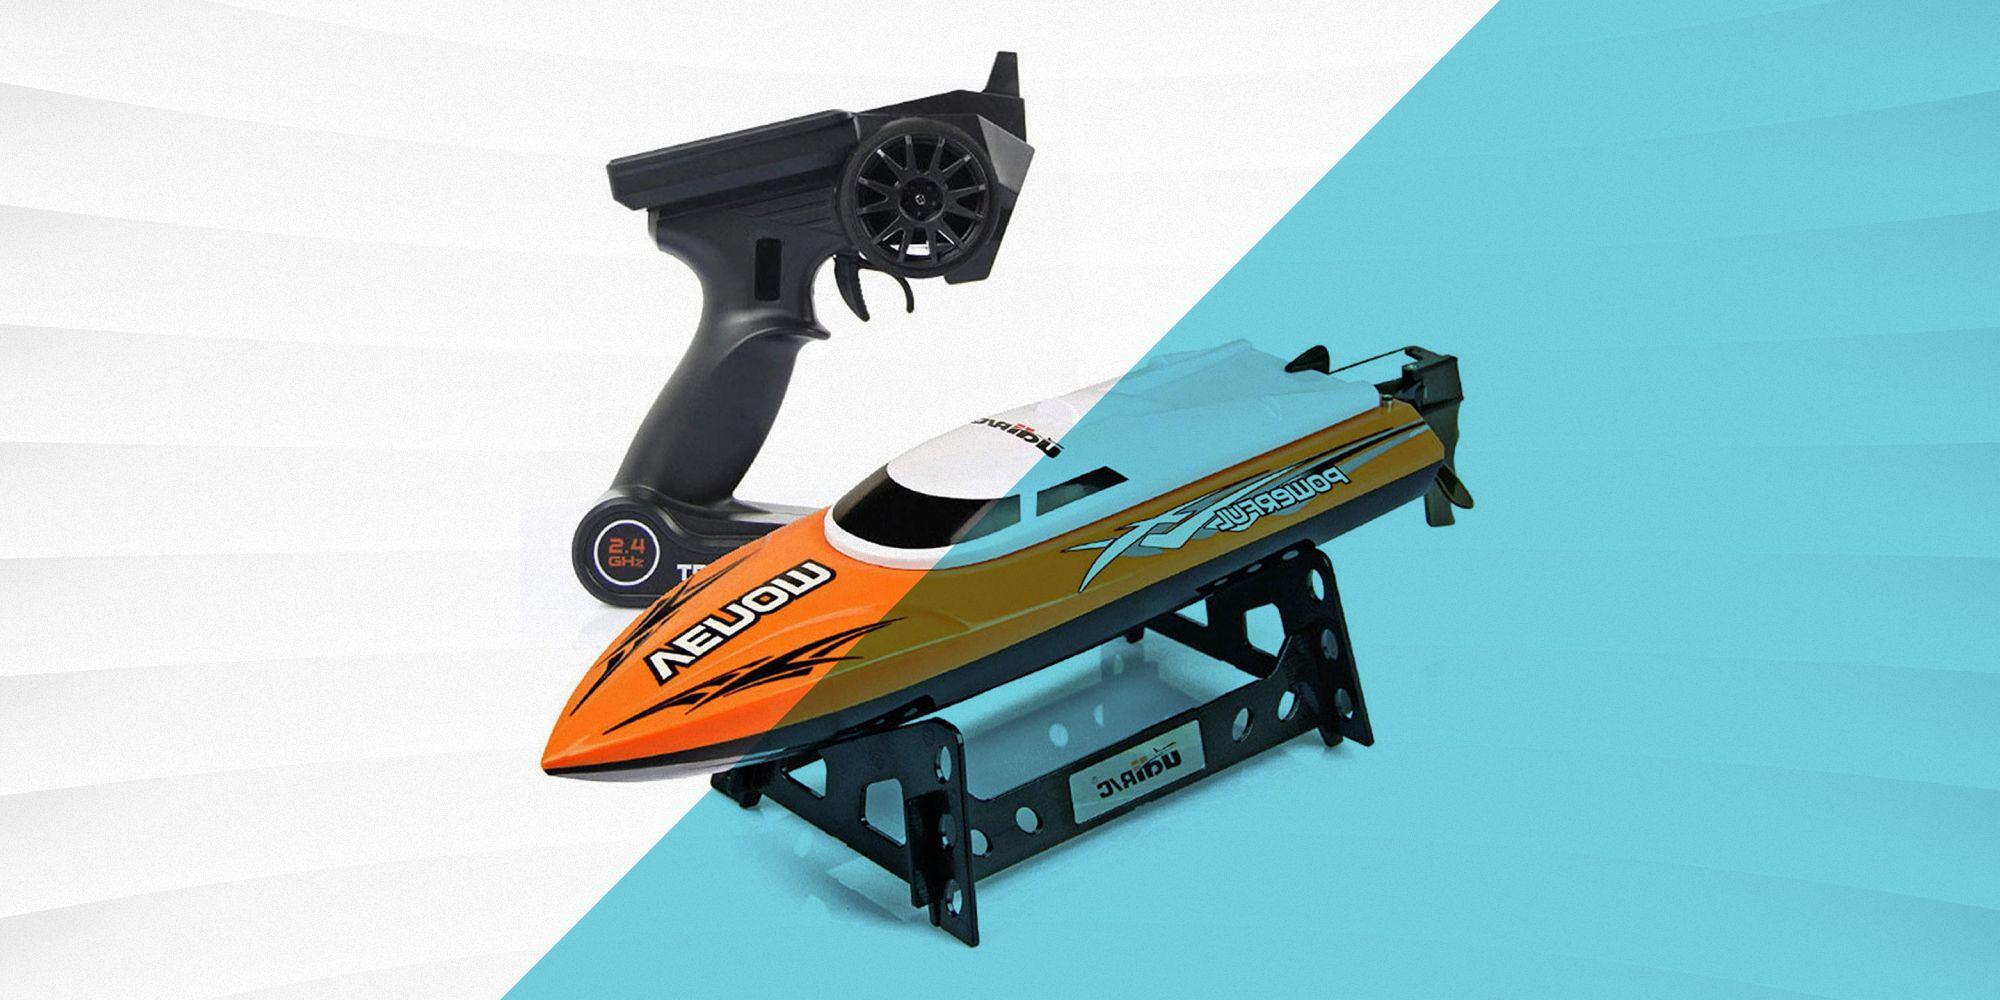 Rc Truck And Boat: Considerations for Choosing and Safely Operating RC Trucks and Boats